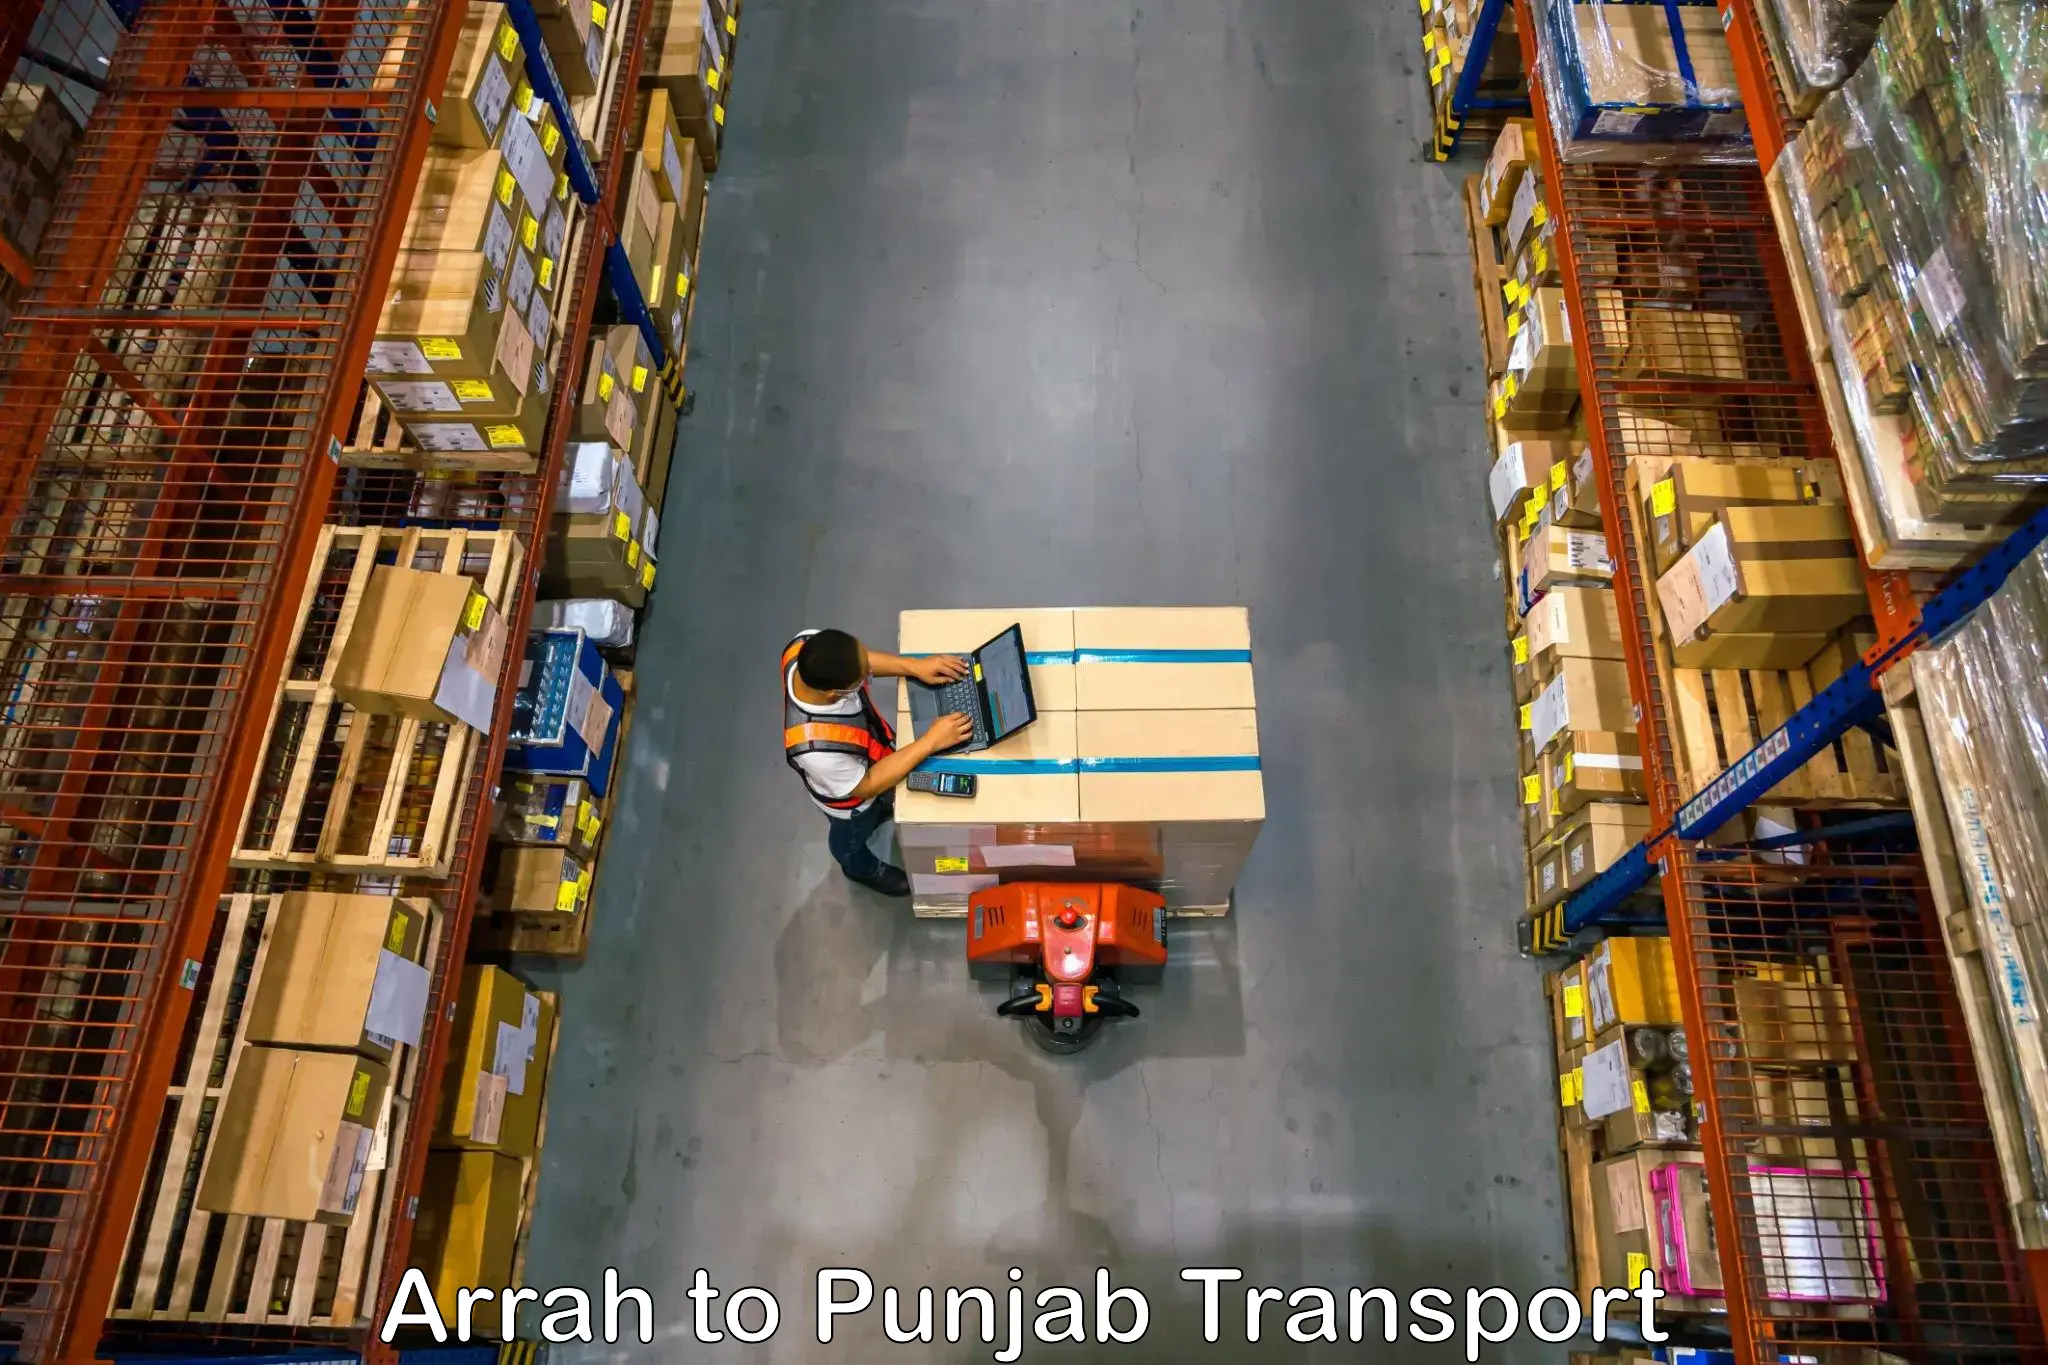 Nearby transport service Arrah to Mohali